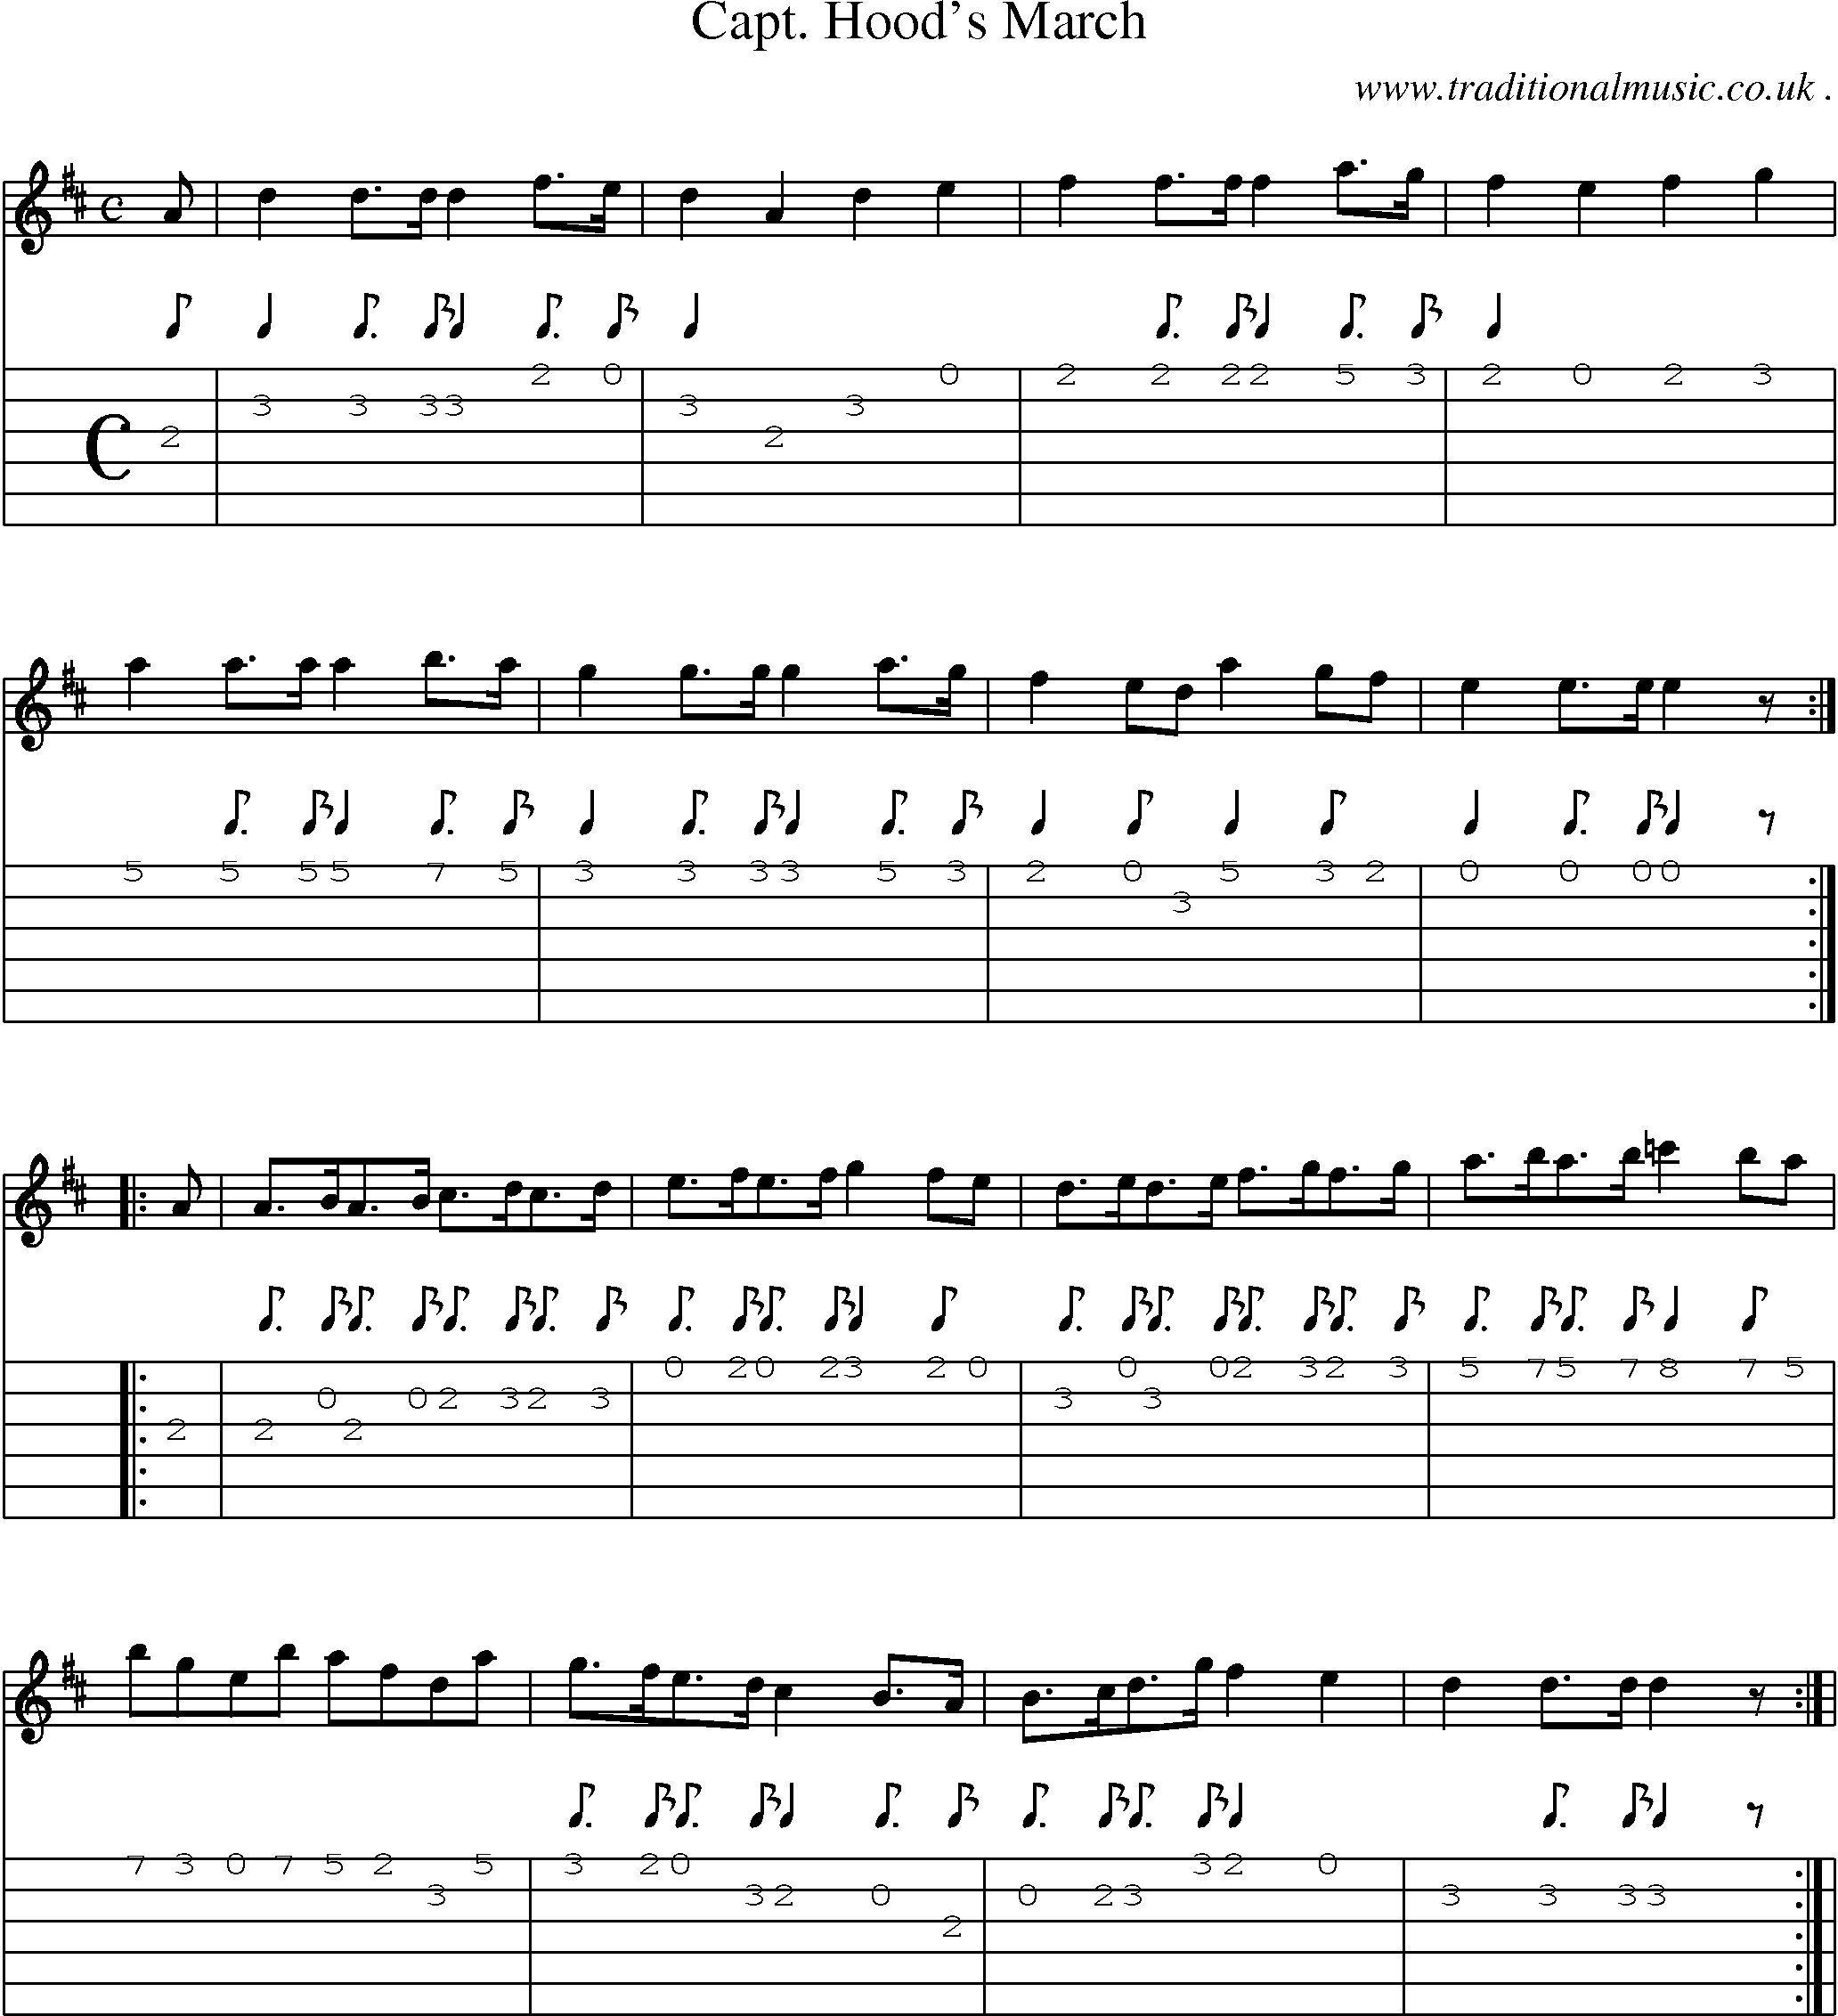 Sheet-Music and Guitar Tabs for Capt Hoods March